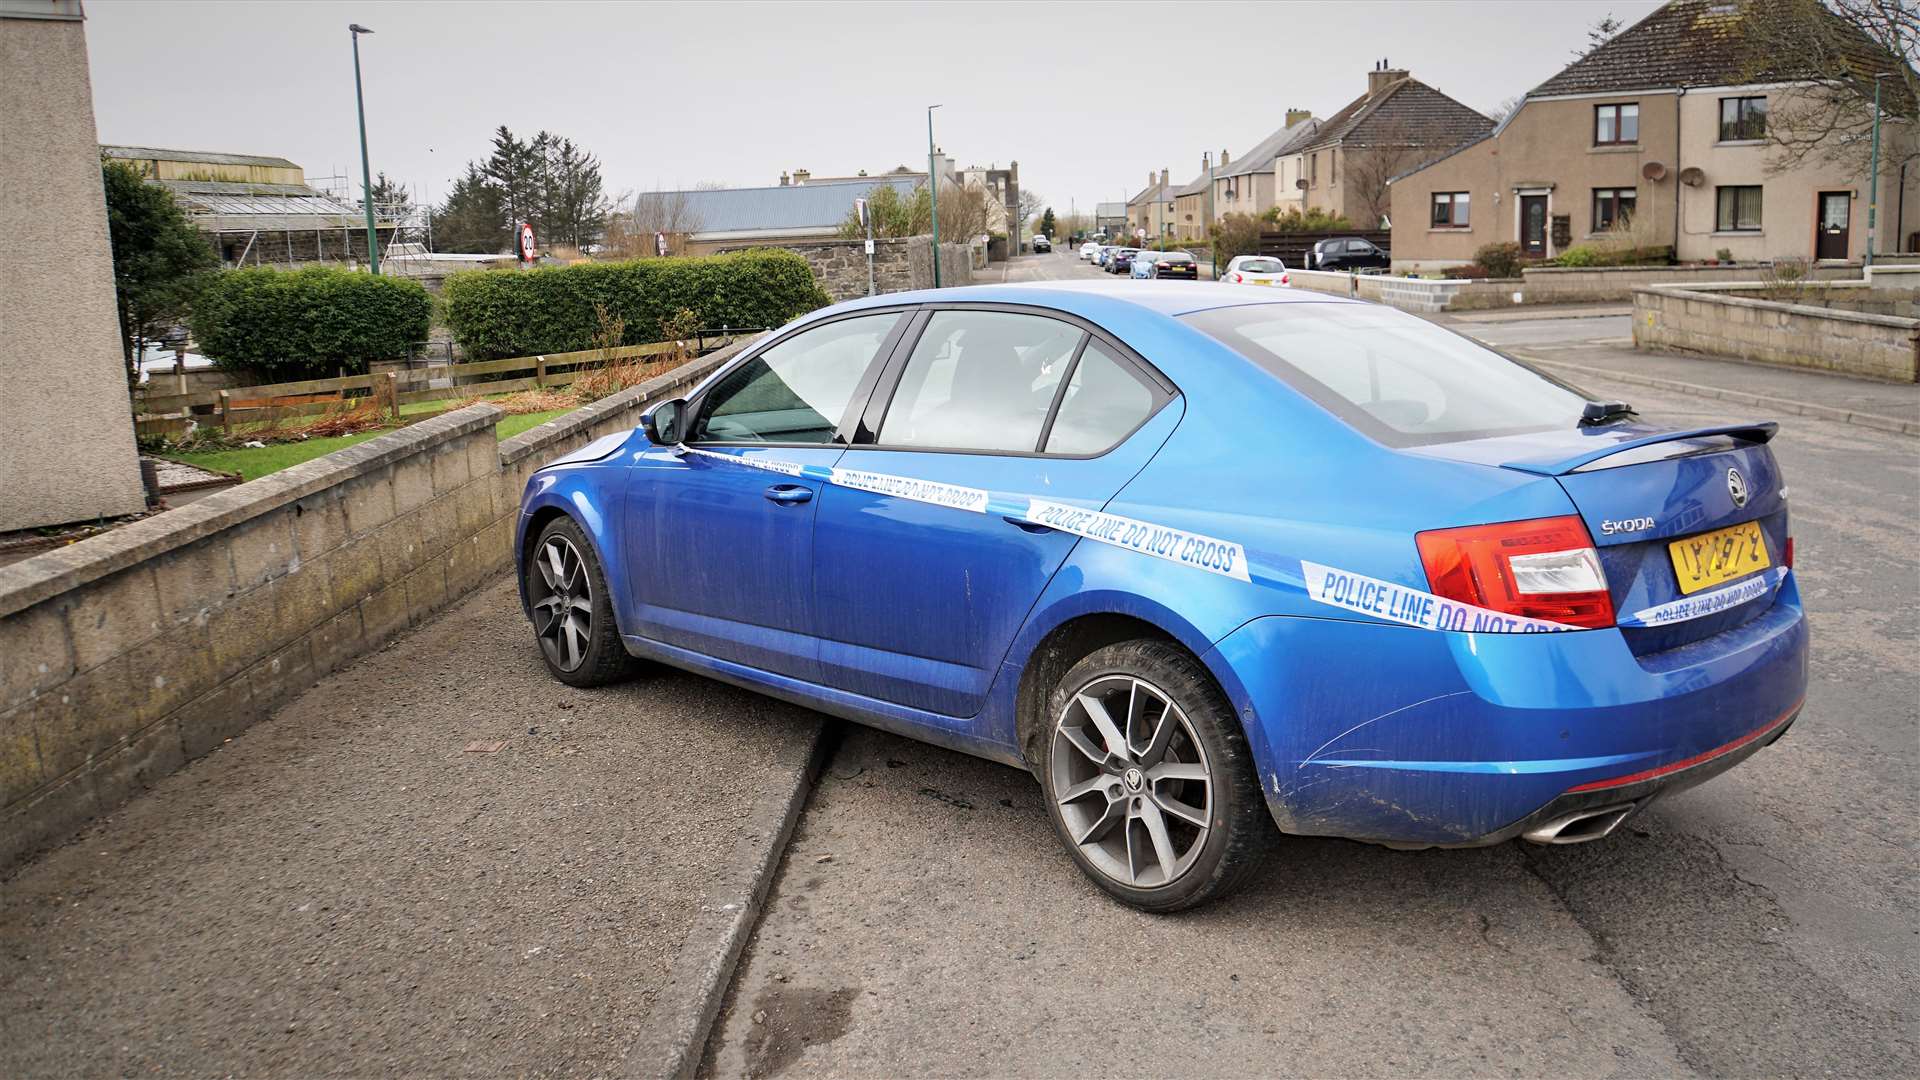 Police tape has been put around the Skoda Octavia showing it is part of a crime scene investigation. Picture: DGS